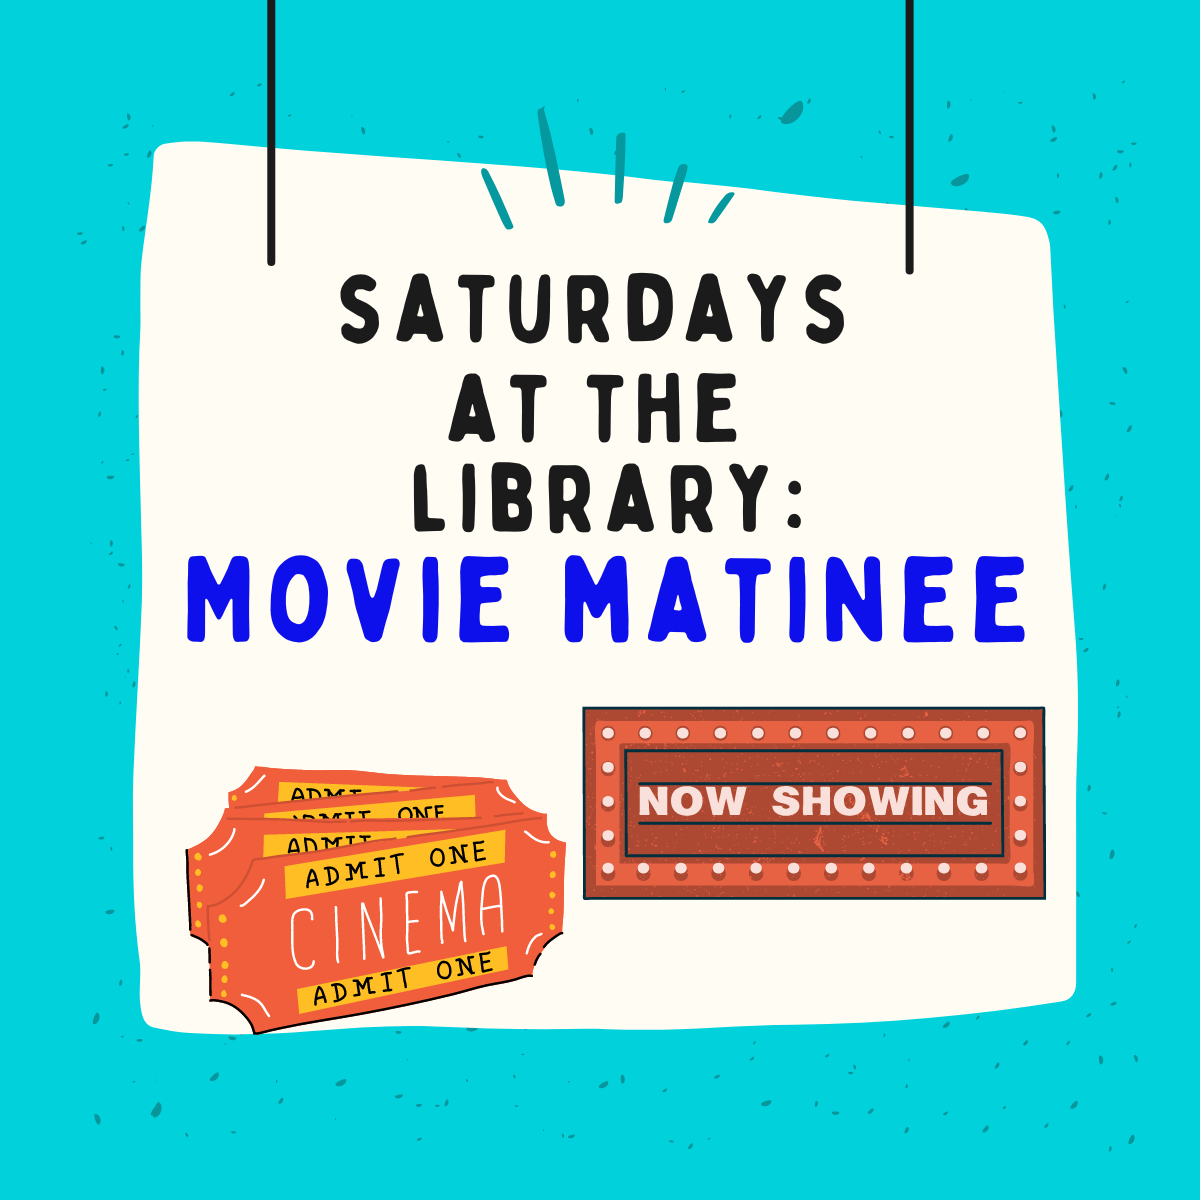 blue background with white square shape in the center, black text reads saturdays at the library. blue text says movie matinee. images on bottom are movie tickets and a rectangle saying now showing